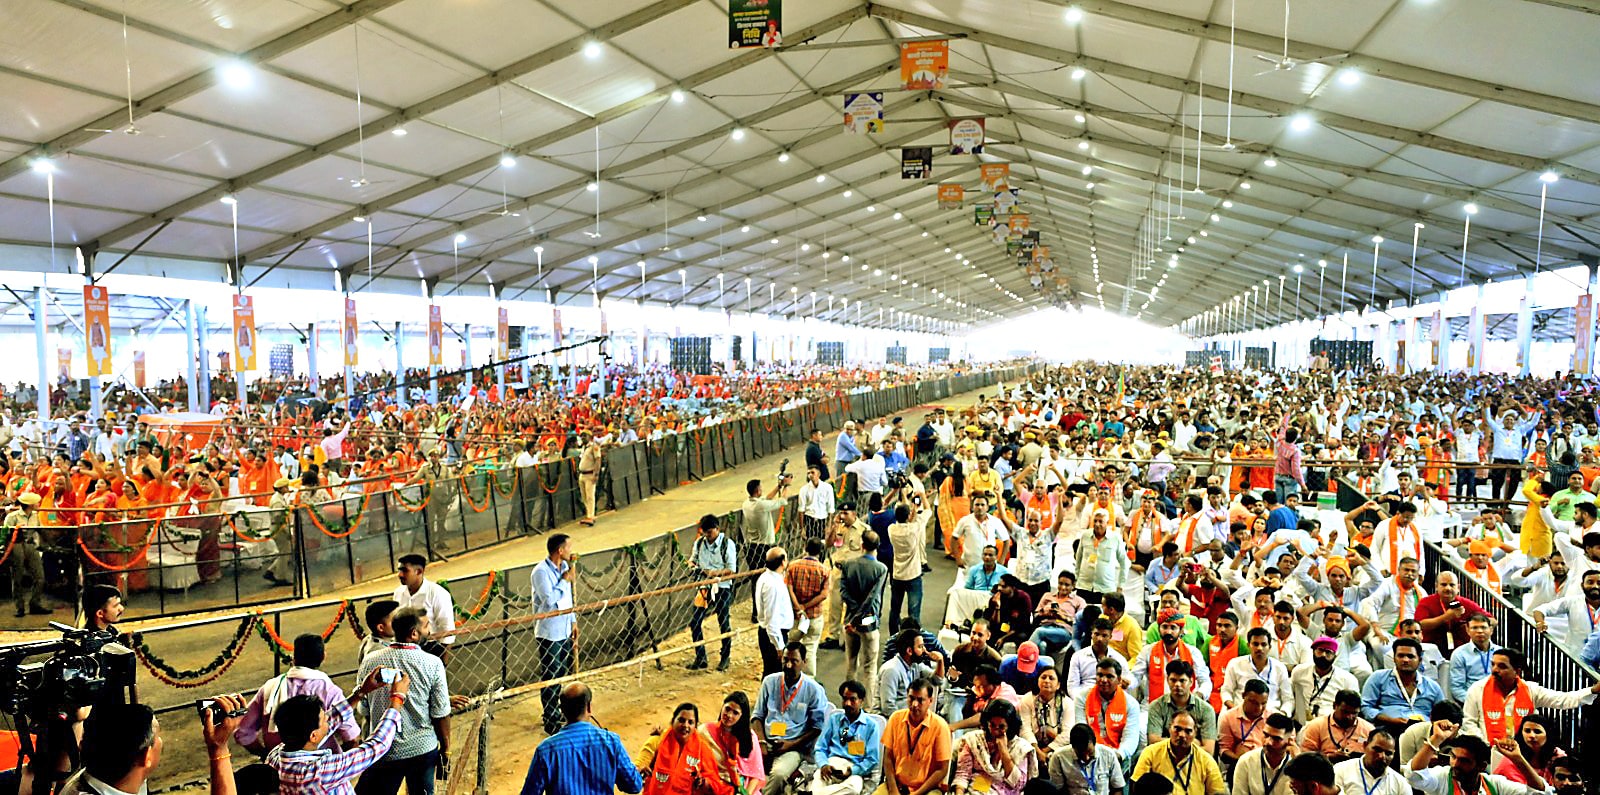 An overview of the crowd at the rally at Dadiya, Jaipur